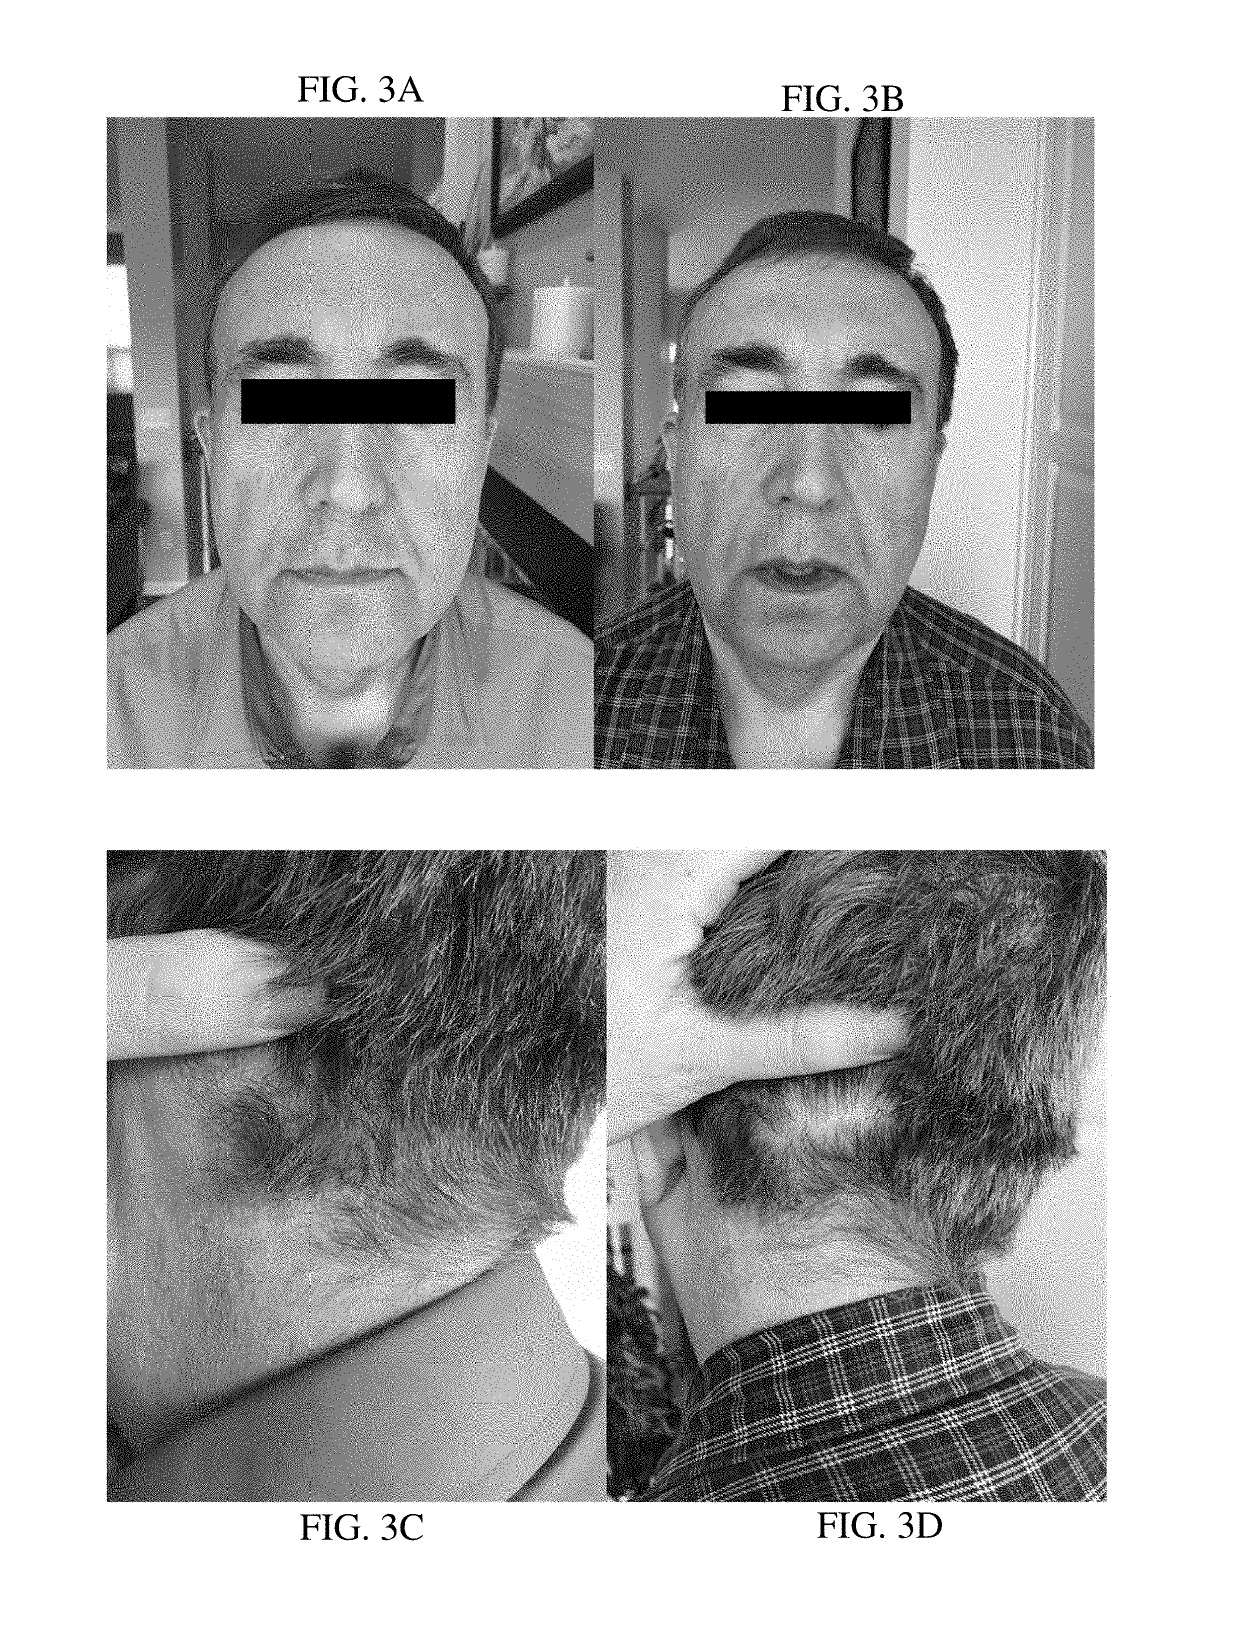 Treatment of psoriasis, seborrheic dermatitis, and eczema of the head and neck